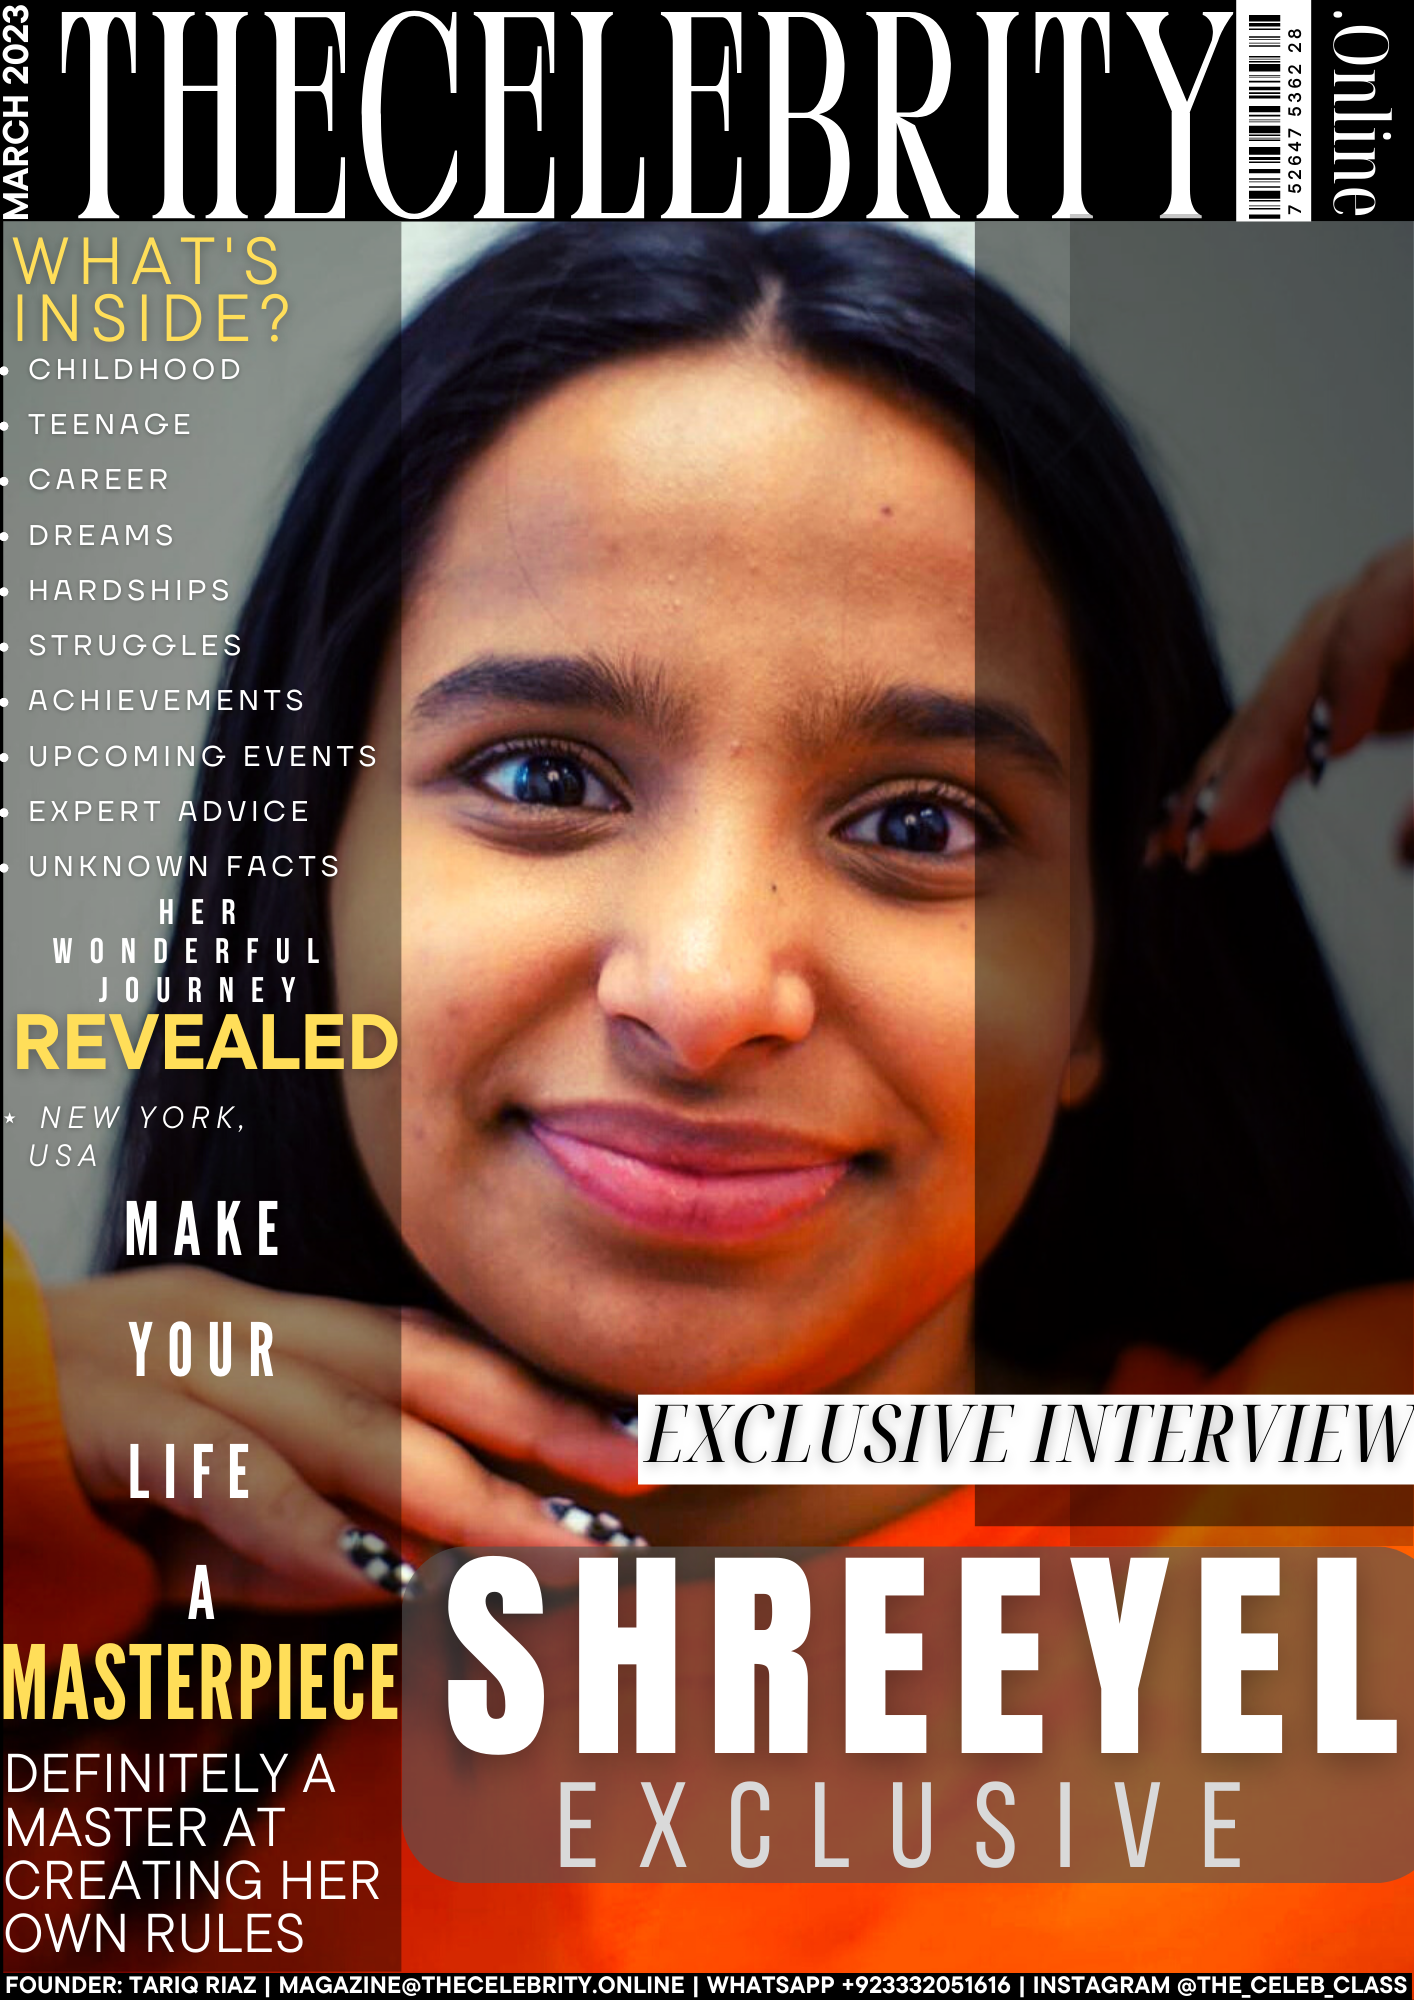 Shreeyel Exclusive Interview – ‘Don’t Take Things Too Personally And Seriously’